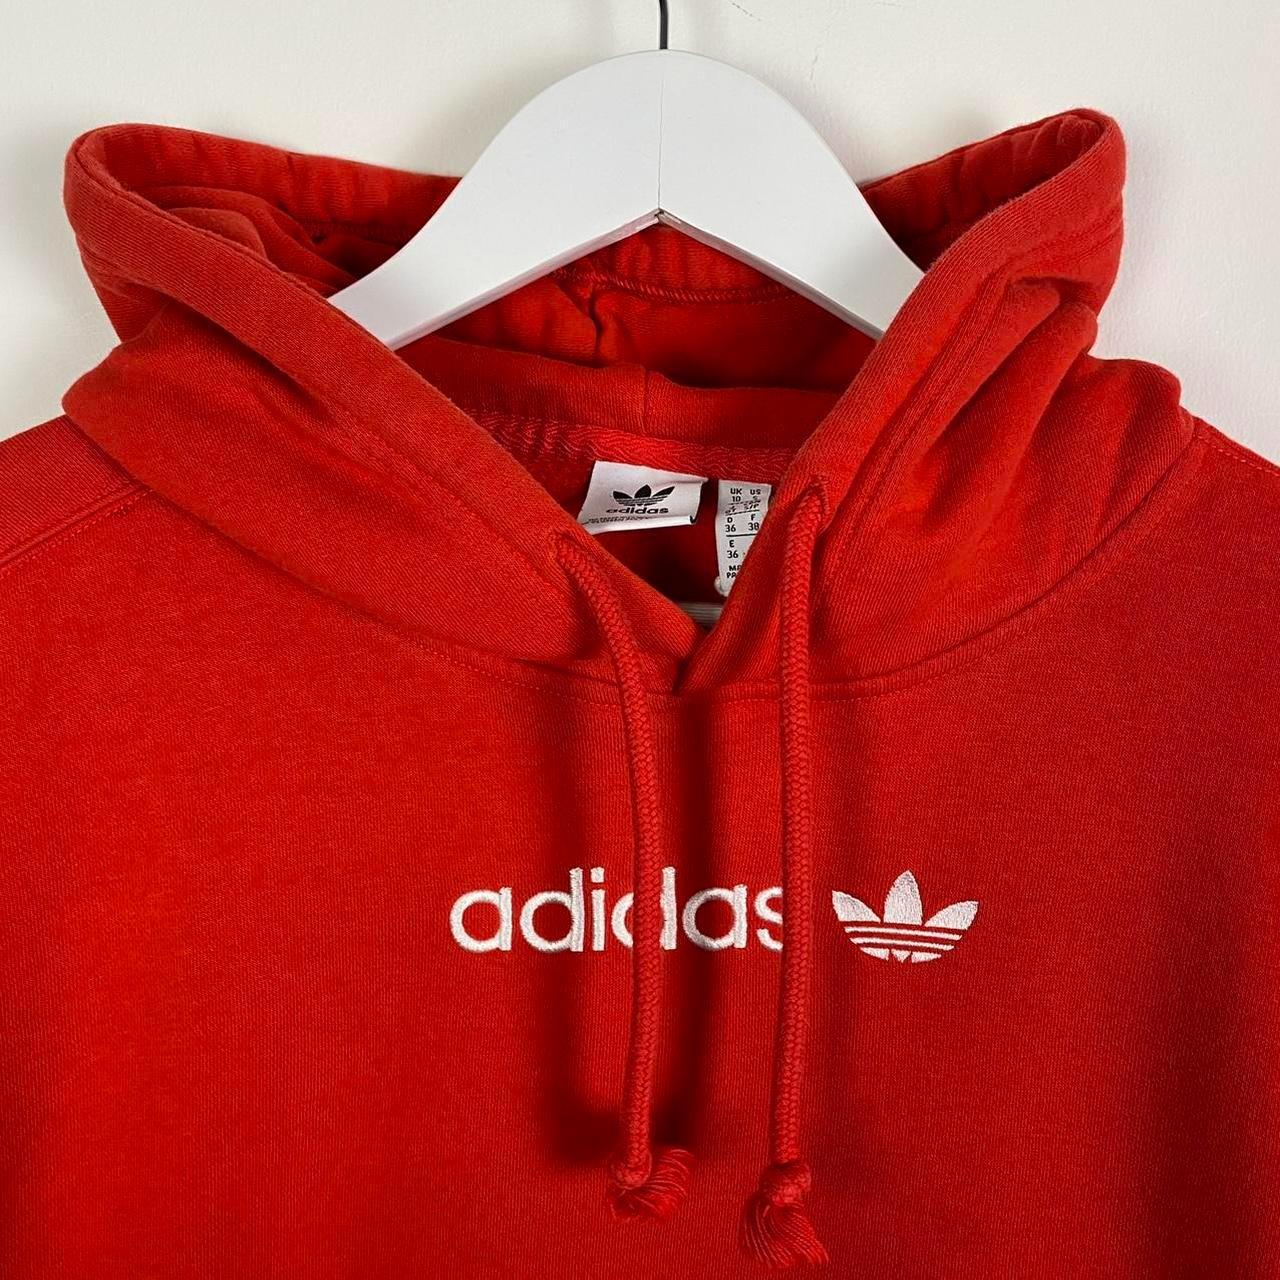 Vintage Adidas Hoodie Center Spellout Embroidered... - Depop